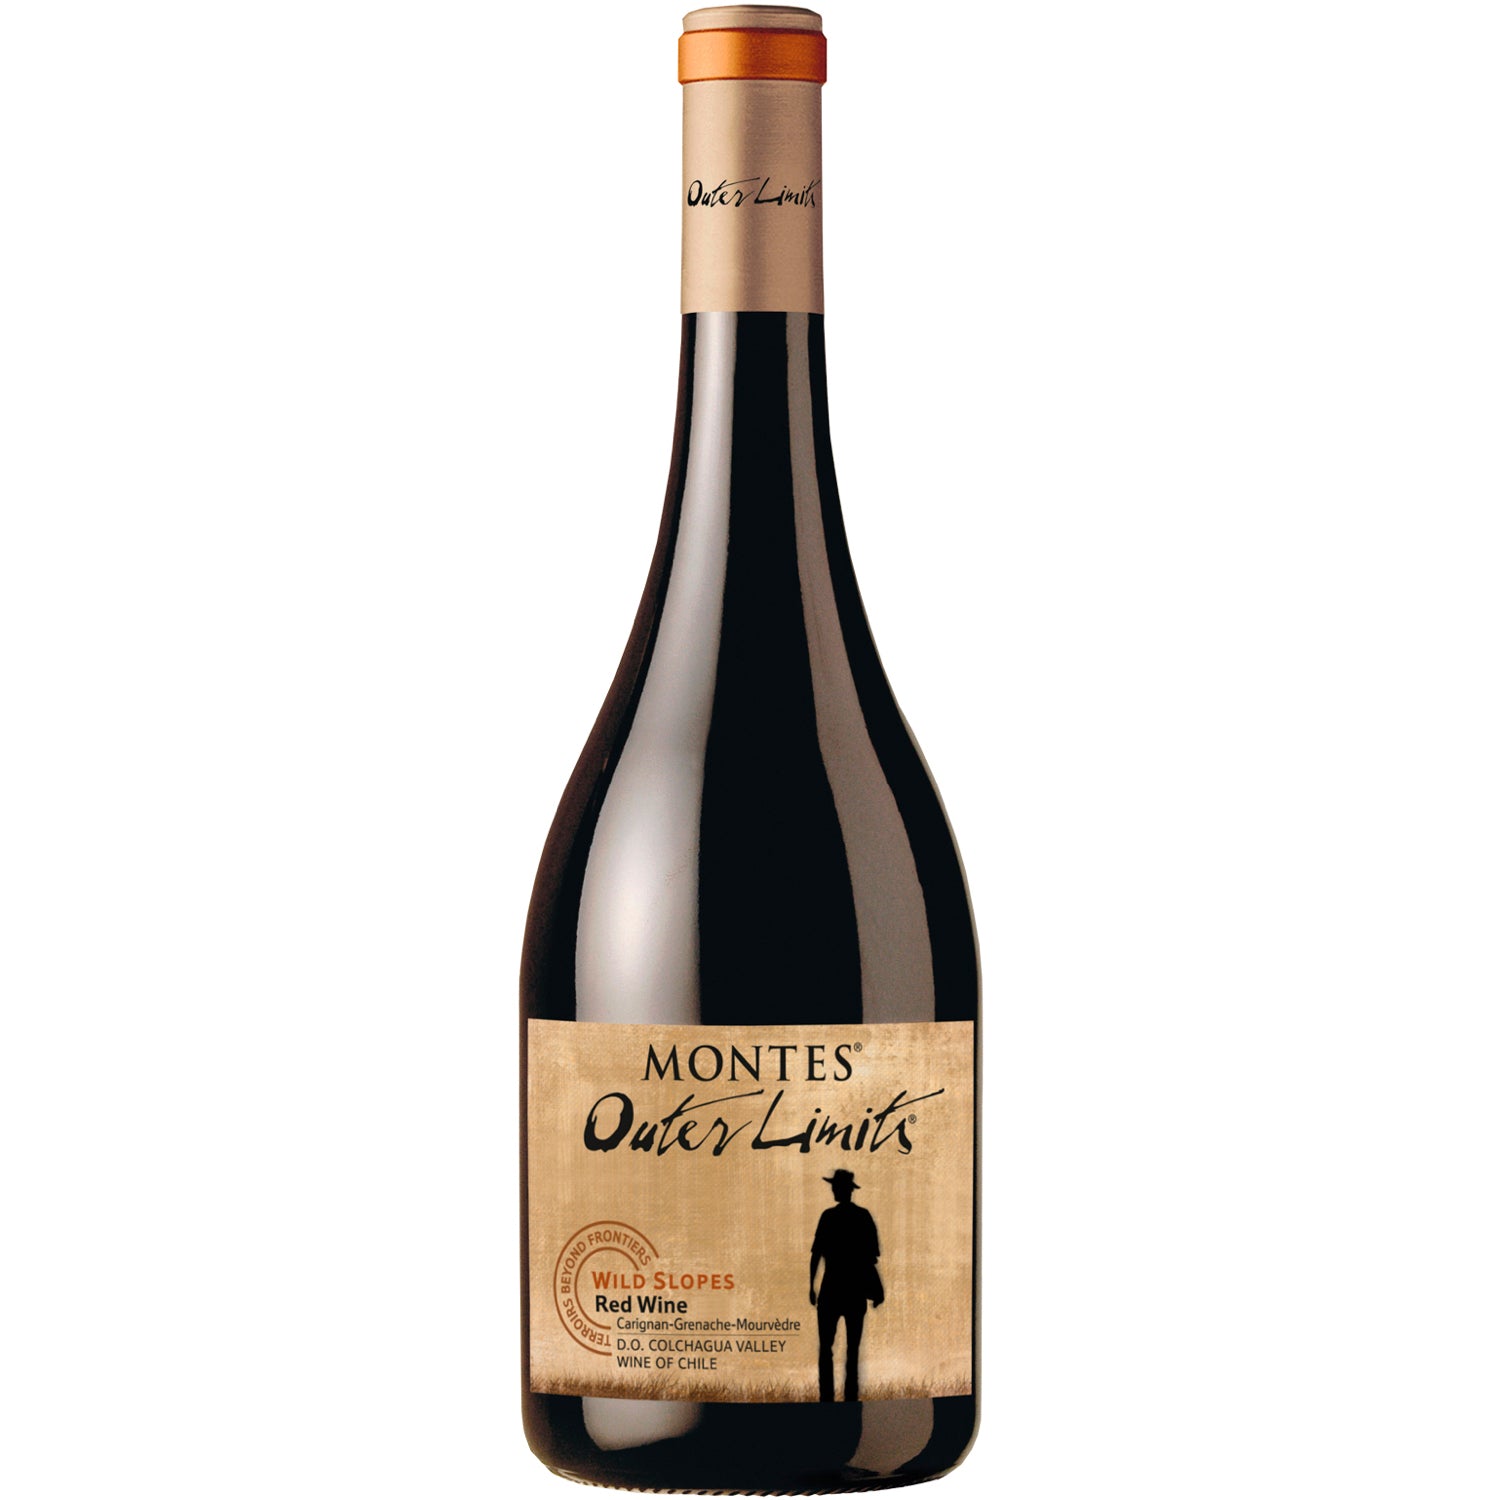 Montes Outer Limits Carignan [750ml]